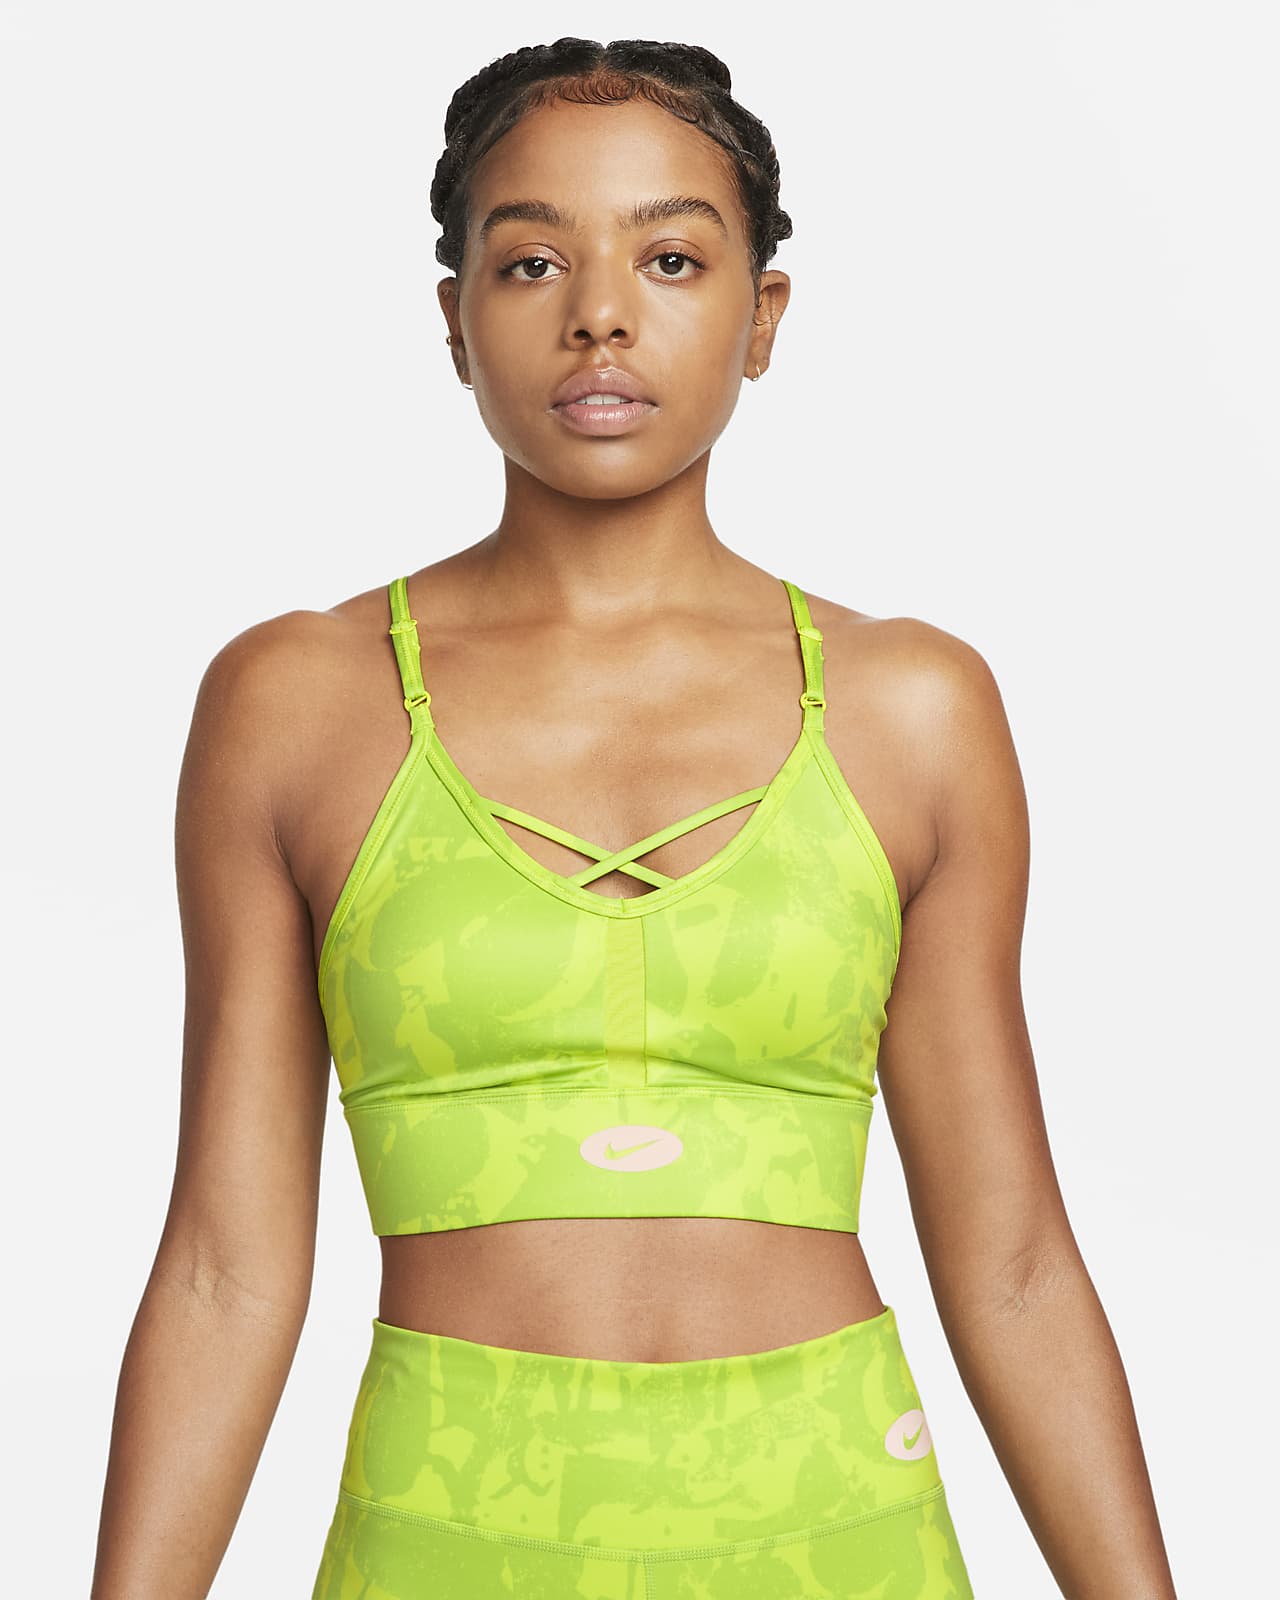 https://static.nike.com/a/images/t_PDP_1280_v1/f_auto,q_auto:eco/bcd3f4c2-f7d4-4c2d-8c66-c38aa22593ed/indy-icon-clash-womens-light-support-padded-printed-sports-bra-x1hzXg.png